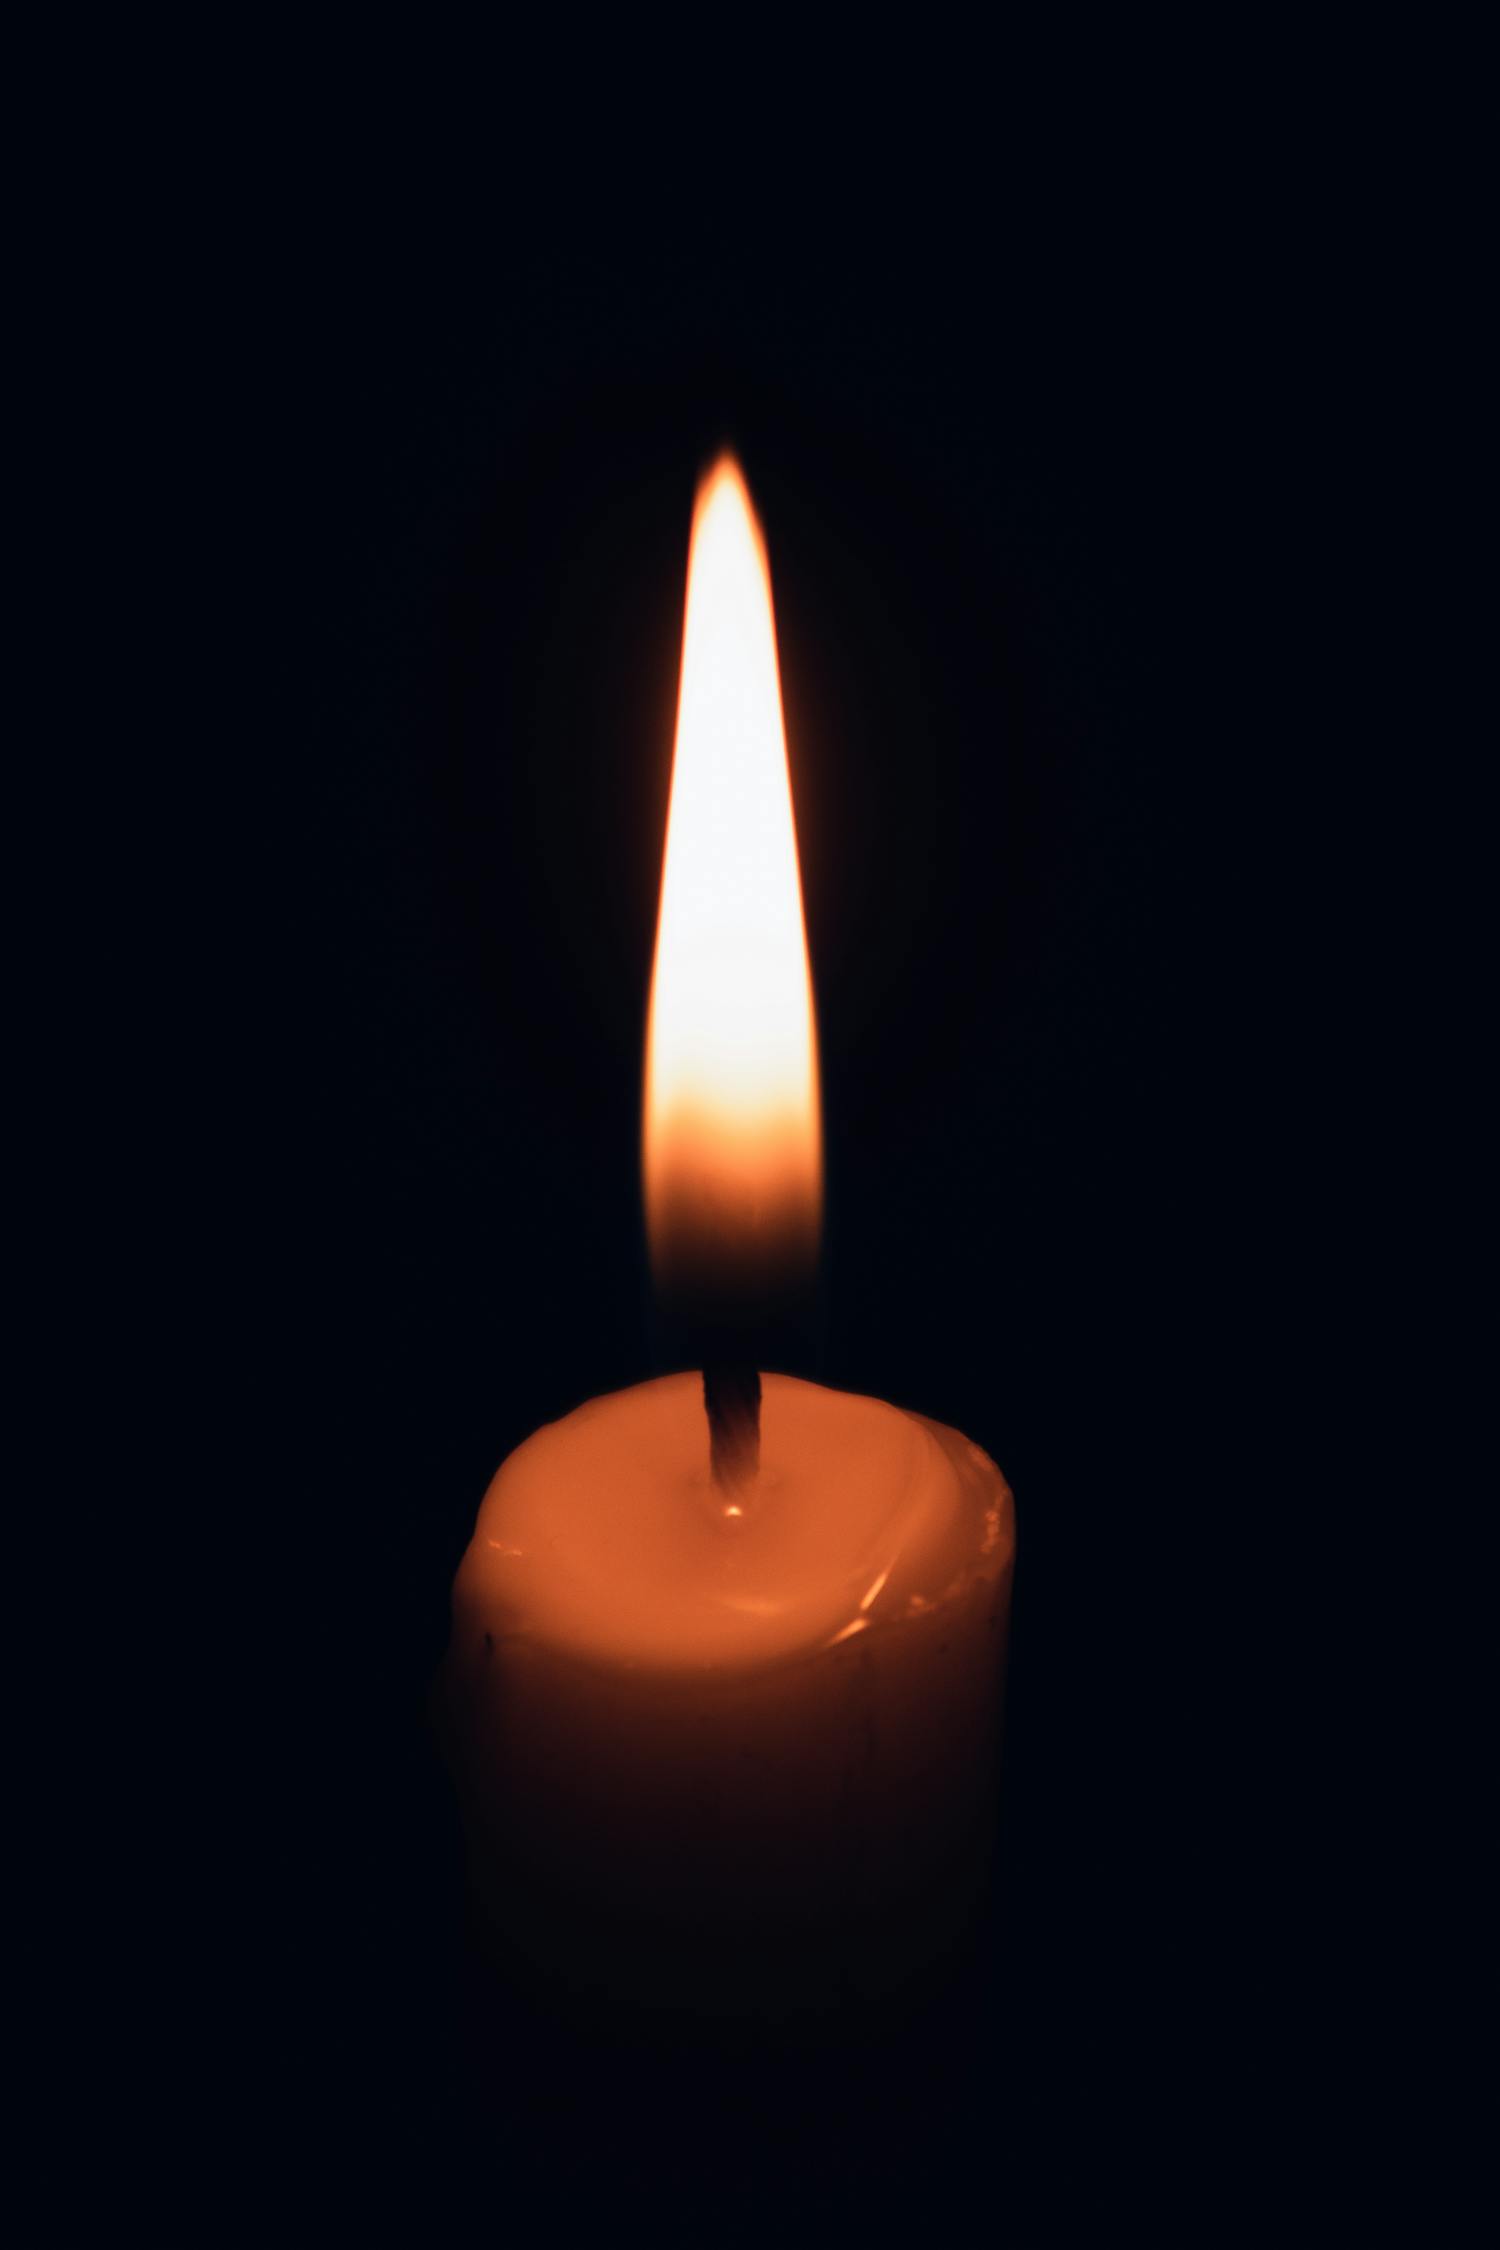 Lighted Candle in Dark Room · Free Stock Photo